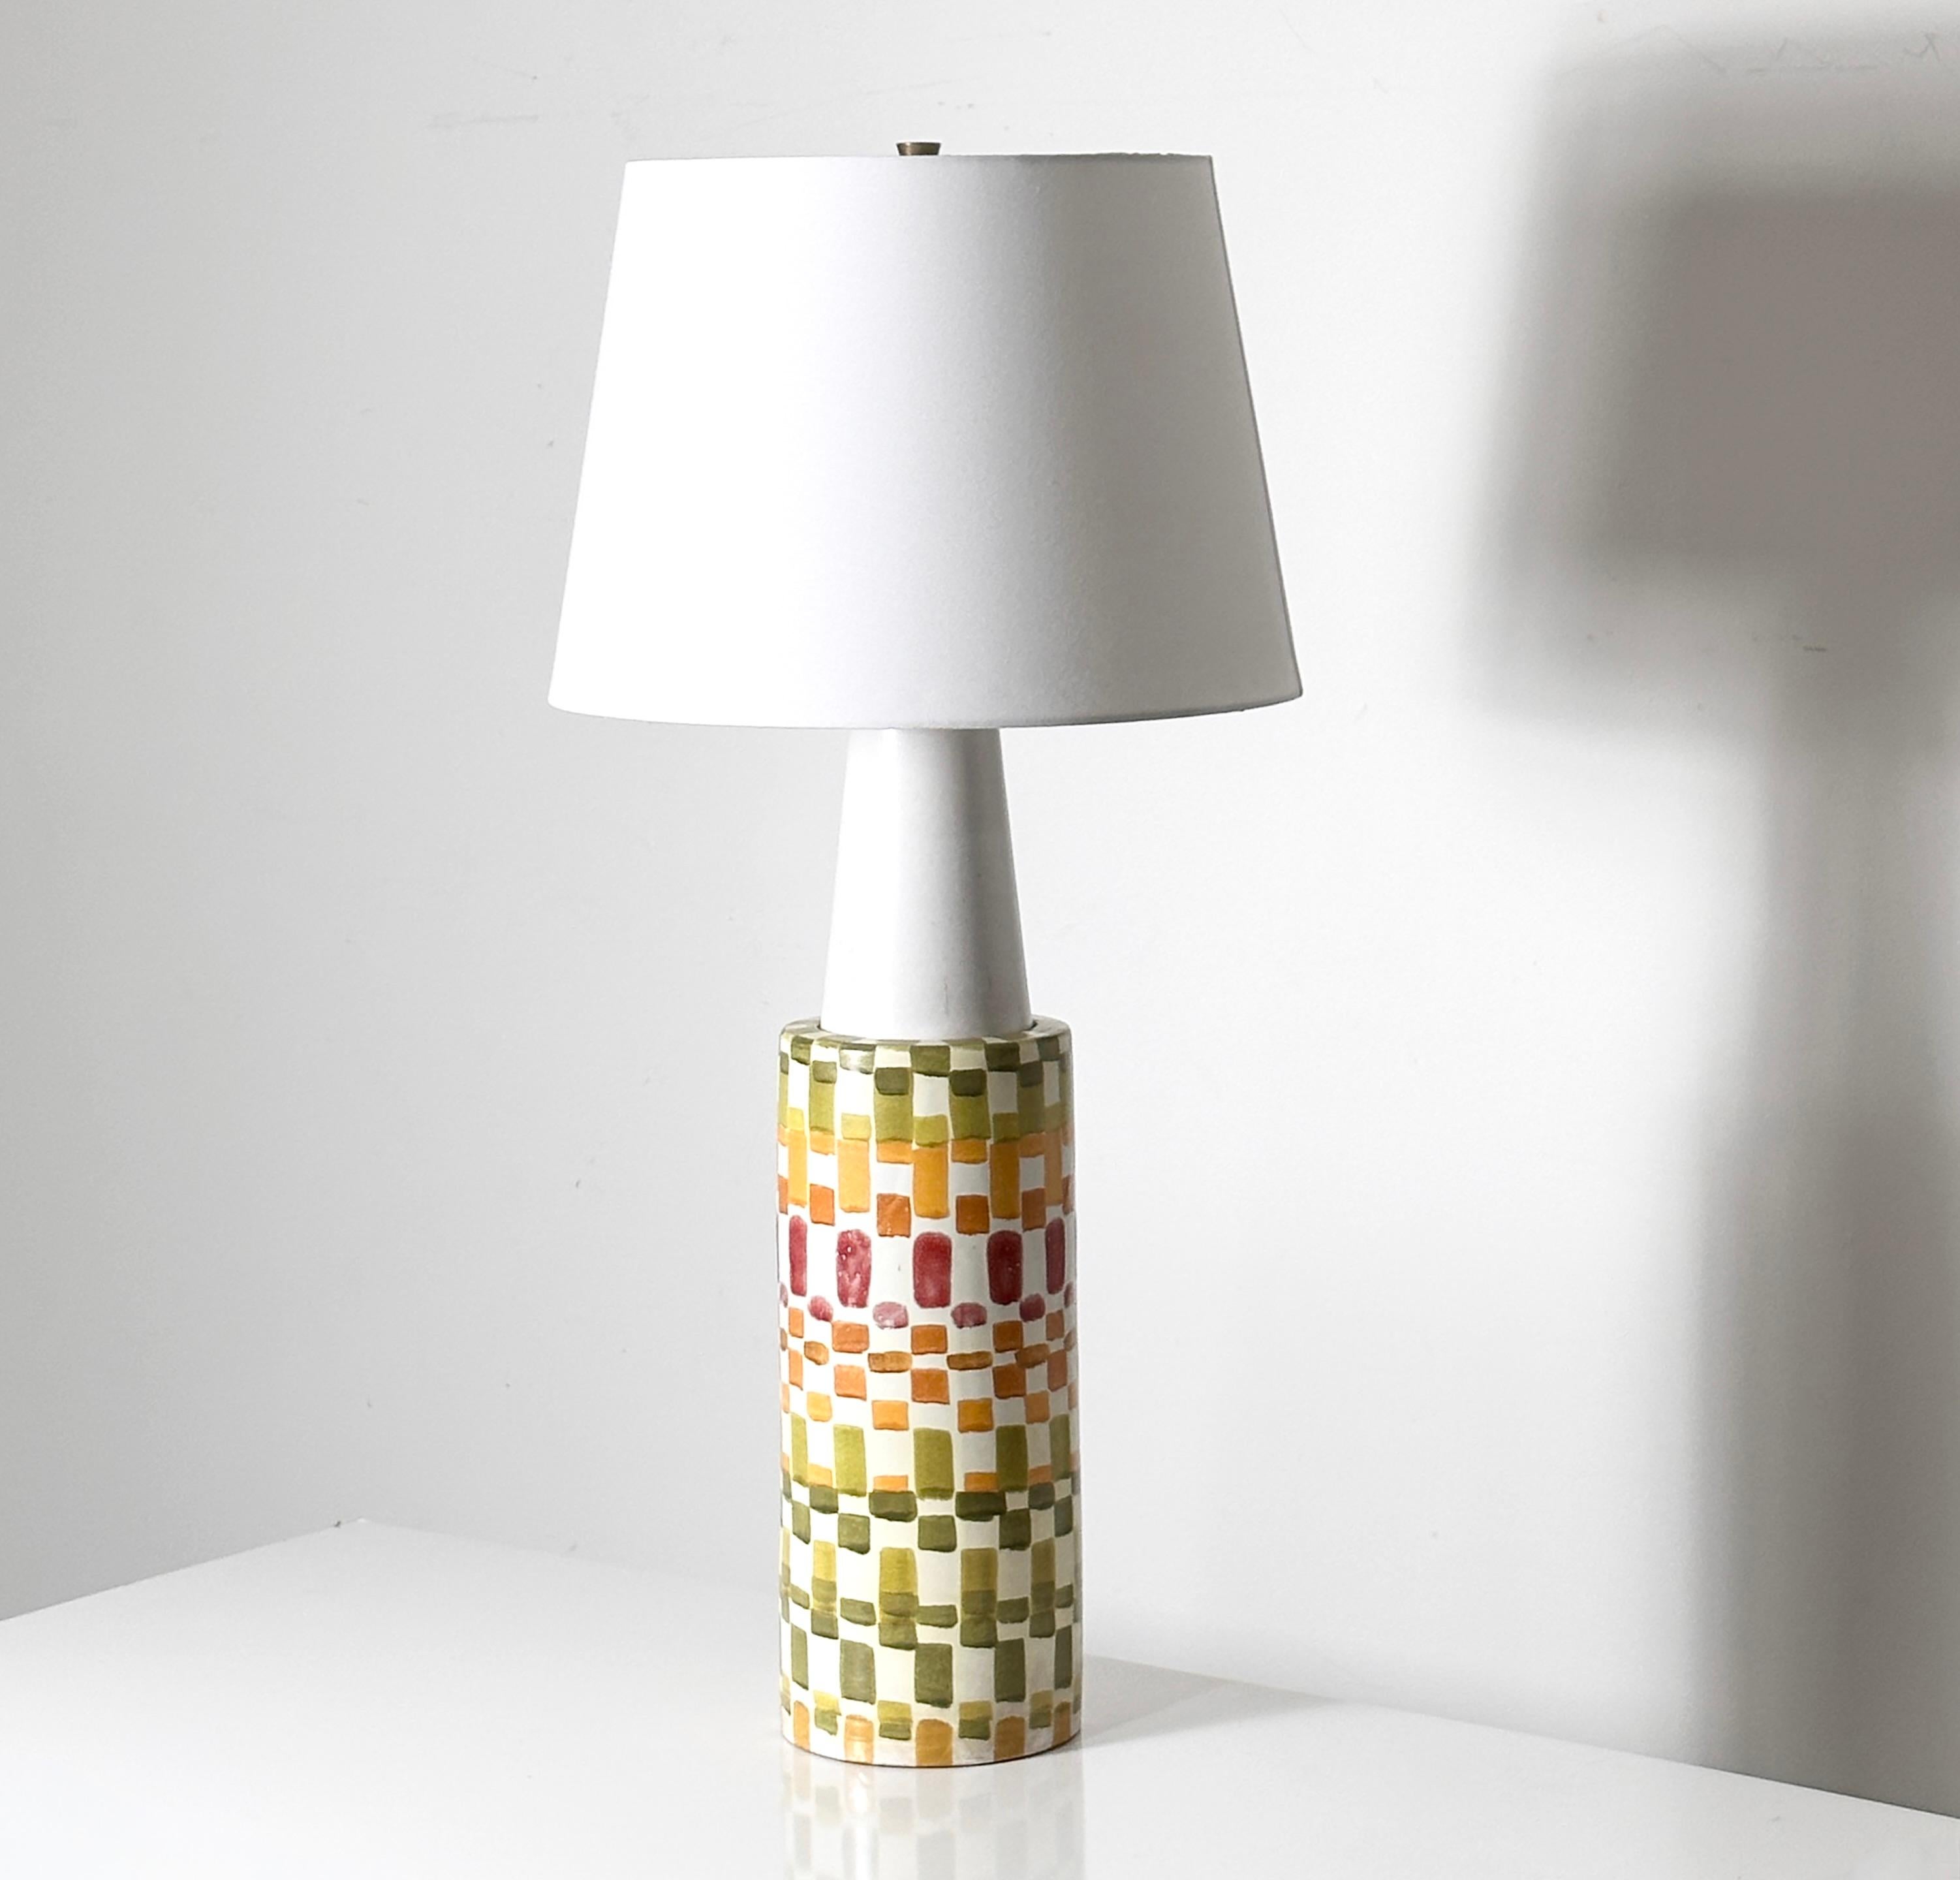 Massive and rare hand painted ceramic lamp by Aldo Londi for Bitossi 
circa 1960s
Colorful mosaic style glaze pattern with white conical apex
Signed to base